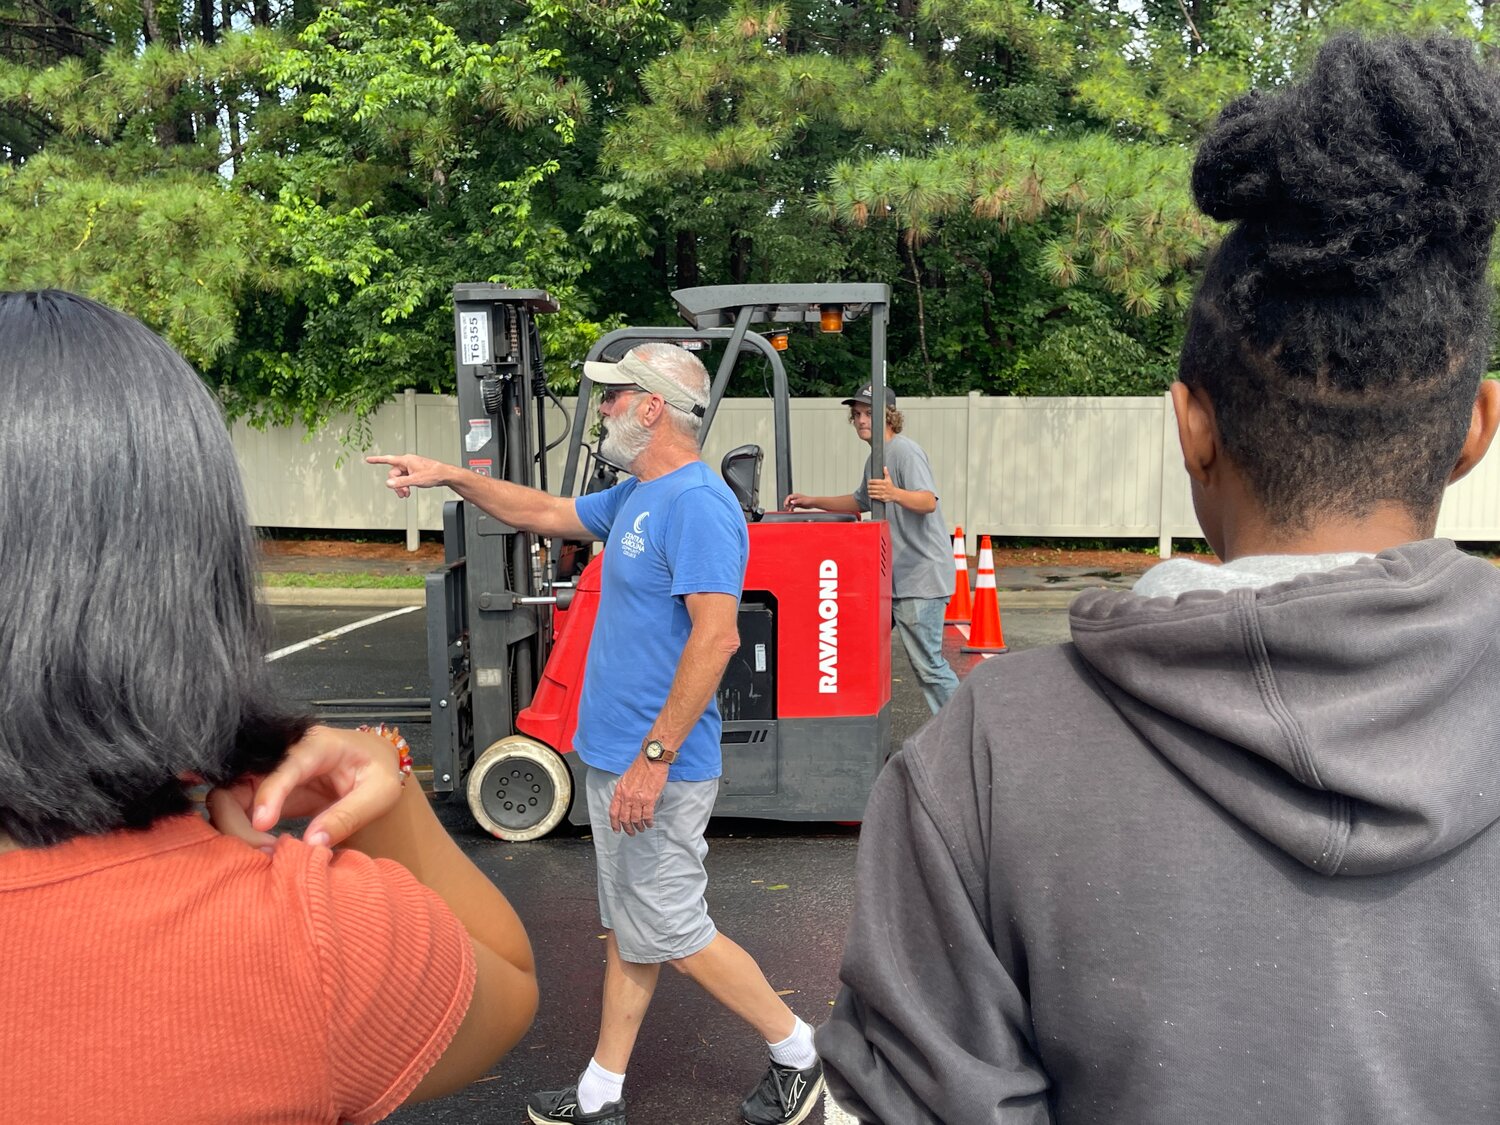 Forklift Instructor and Safety Coordinator Ben Rankin, wearing a blue shirt, continues to teach and instruct the students through the forklift course as attendees observe.